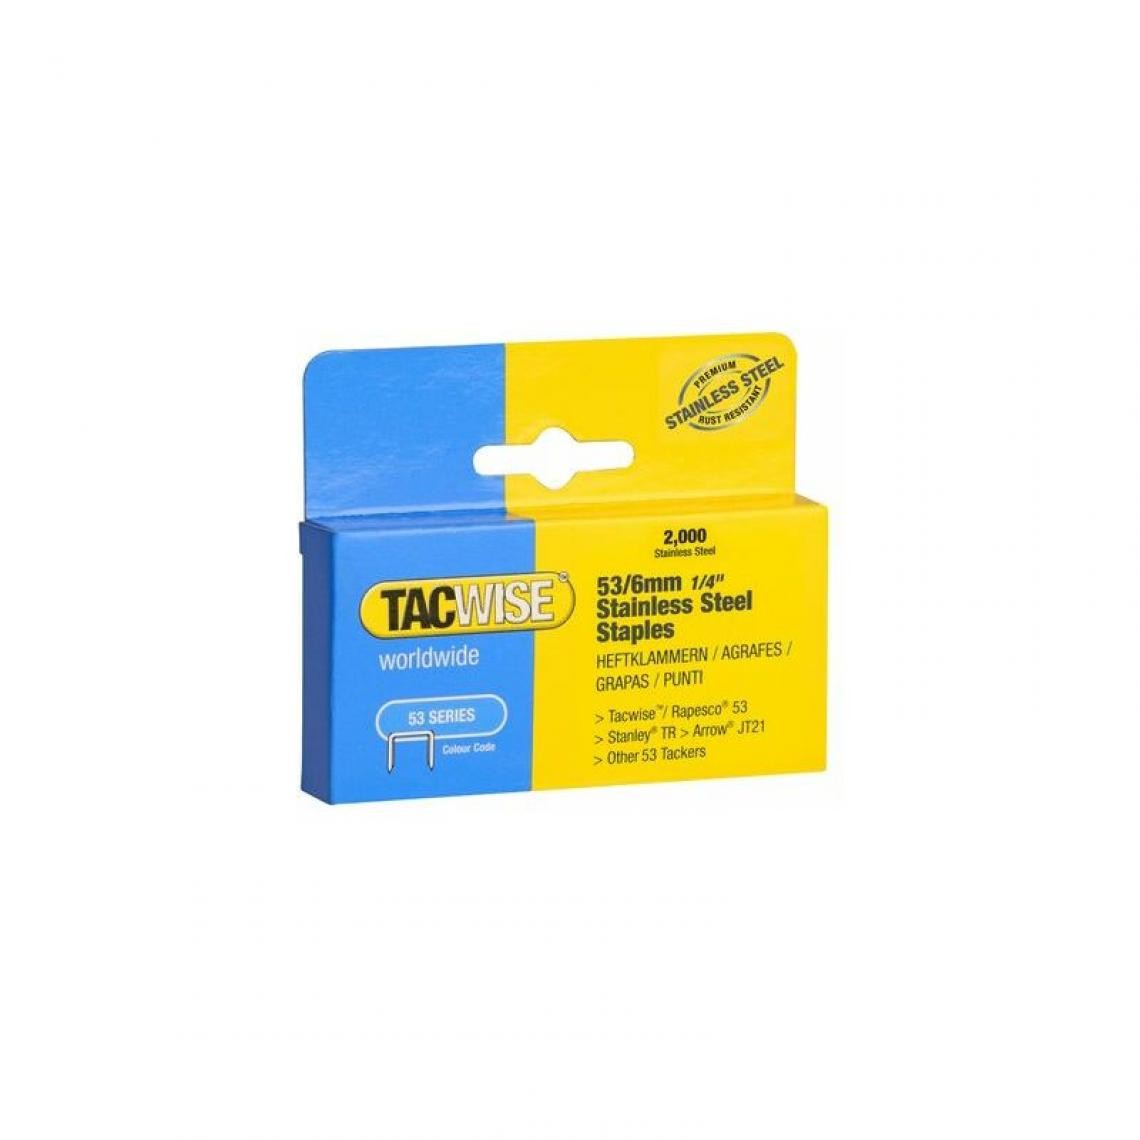 Tacwise - TACWISE Agrafes 53/10 mm, acier inoxydable, 2.000 pièces () - Boulonnerie